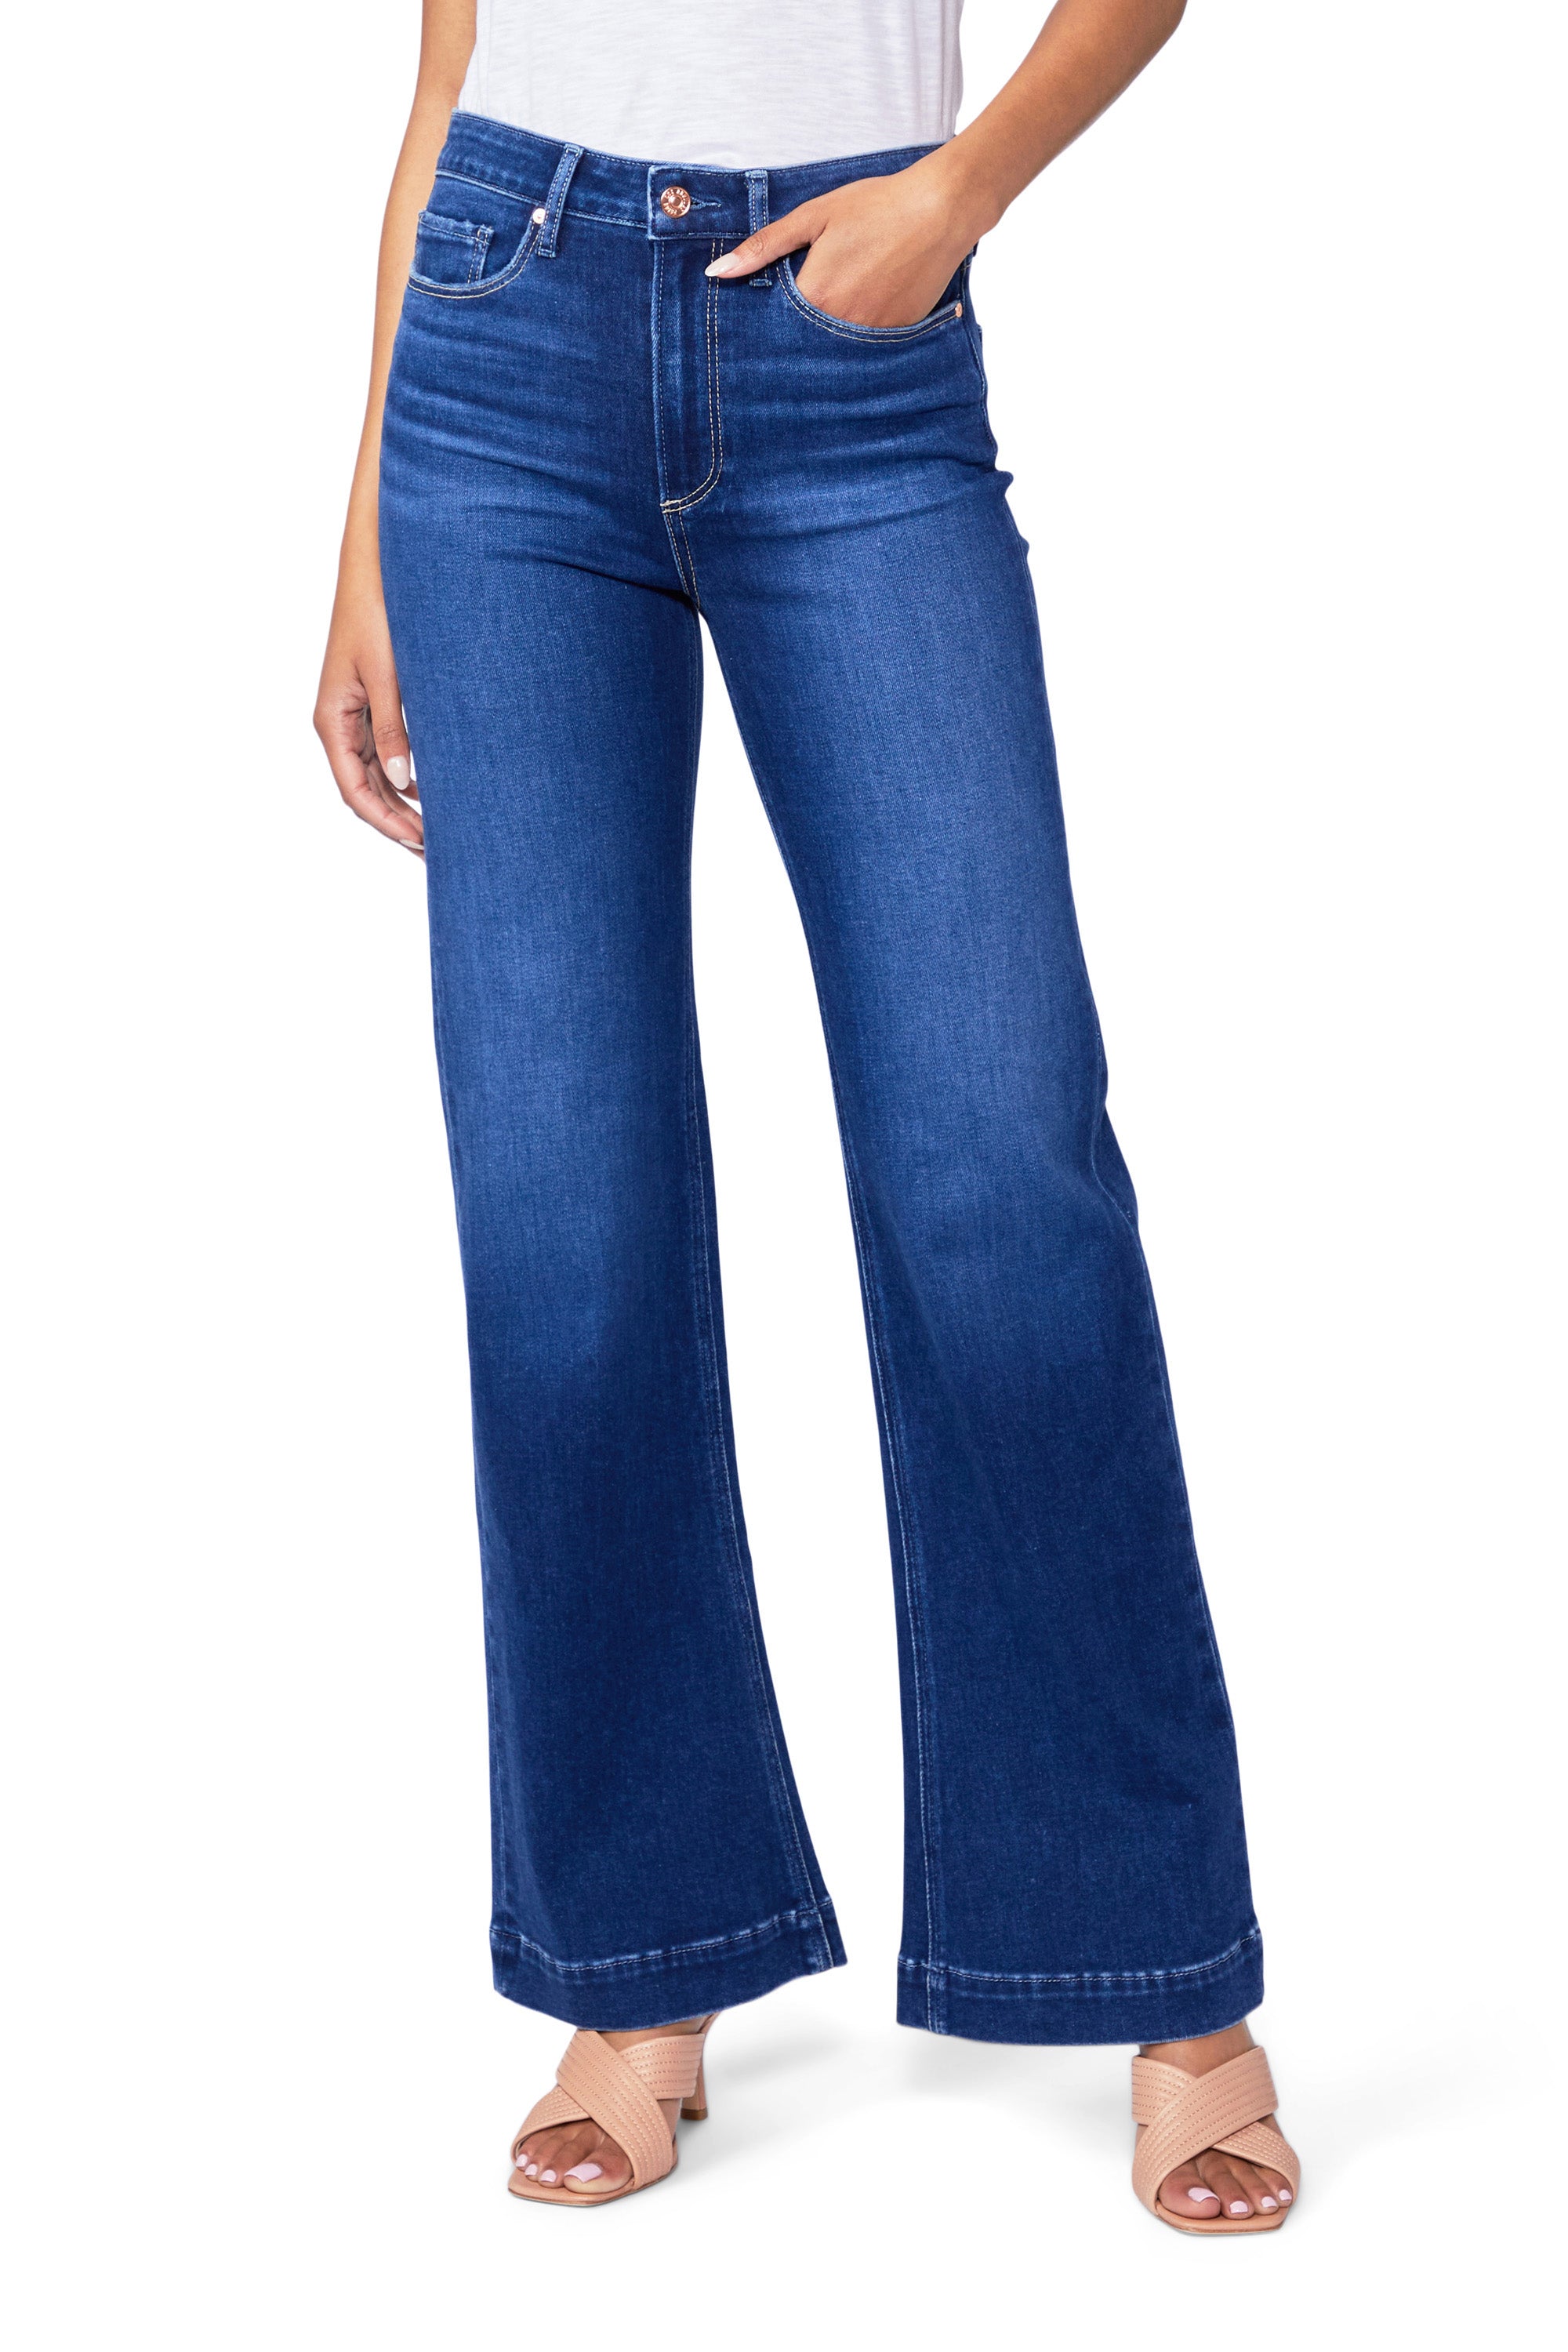 A woman is wearing a pair of high-waisted flared jeans, the Leenah Slim Wide Leg - Notre Dame by Paige, made with TRANSCEND denim.